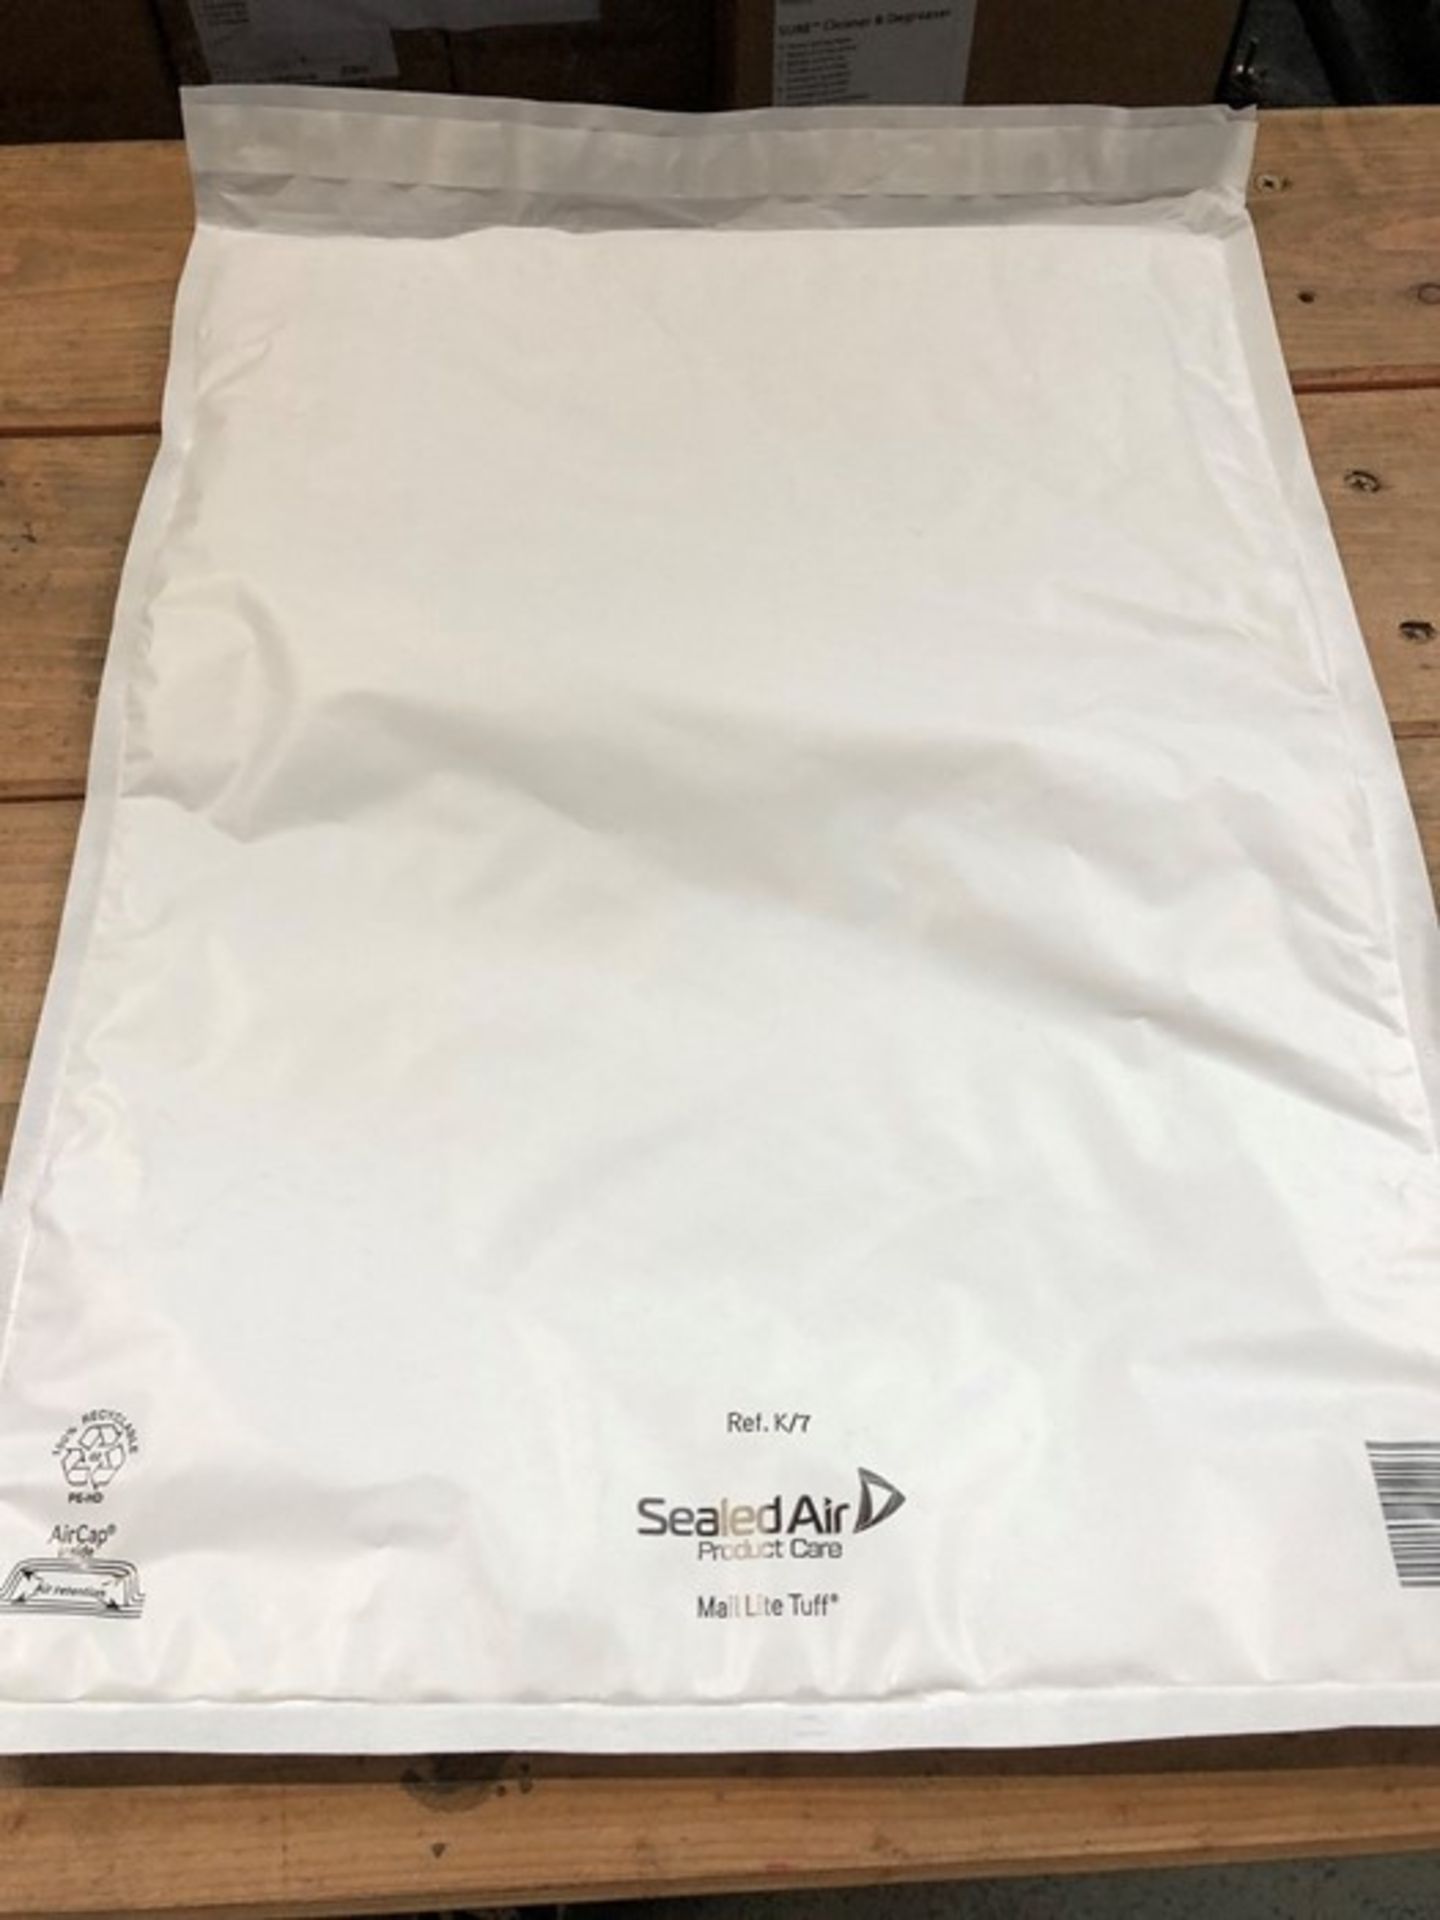 1 LOT TO CONTAIN 50 X SEALED AIR MAIL LITE TUFF A3 SIZE PADDED ENVELOPES IN WHITE